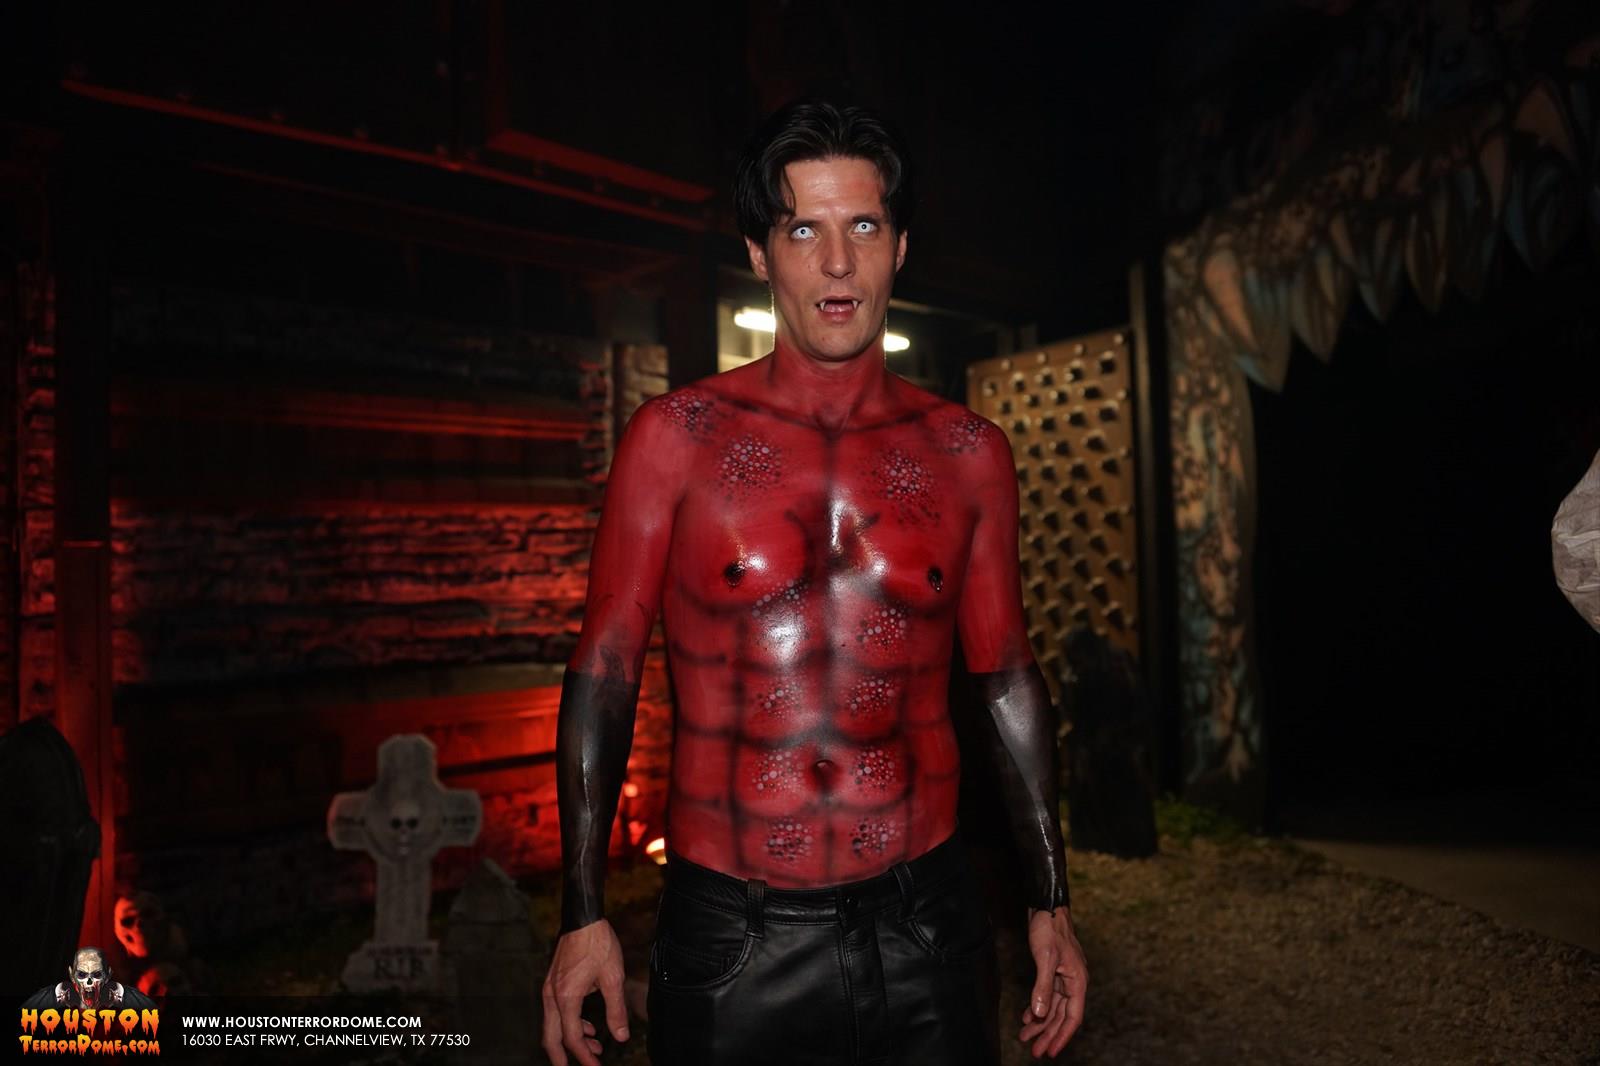 Devil Shows off his airbrushed Abs